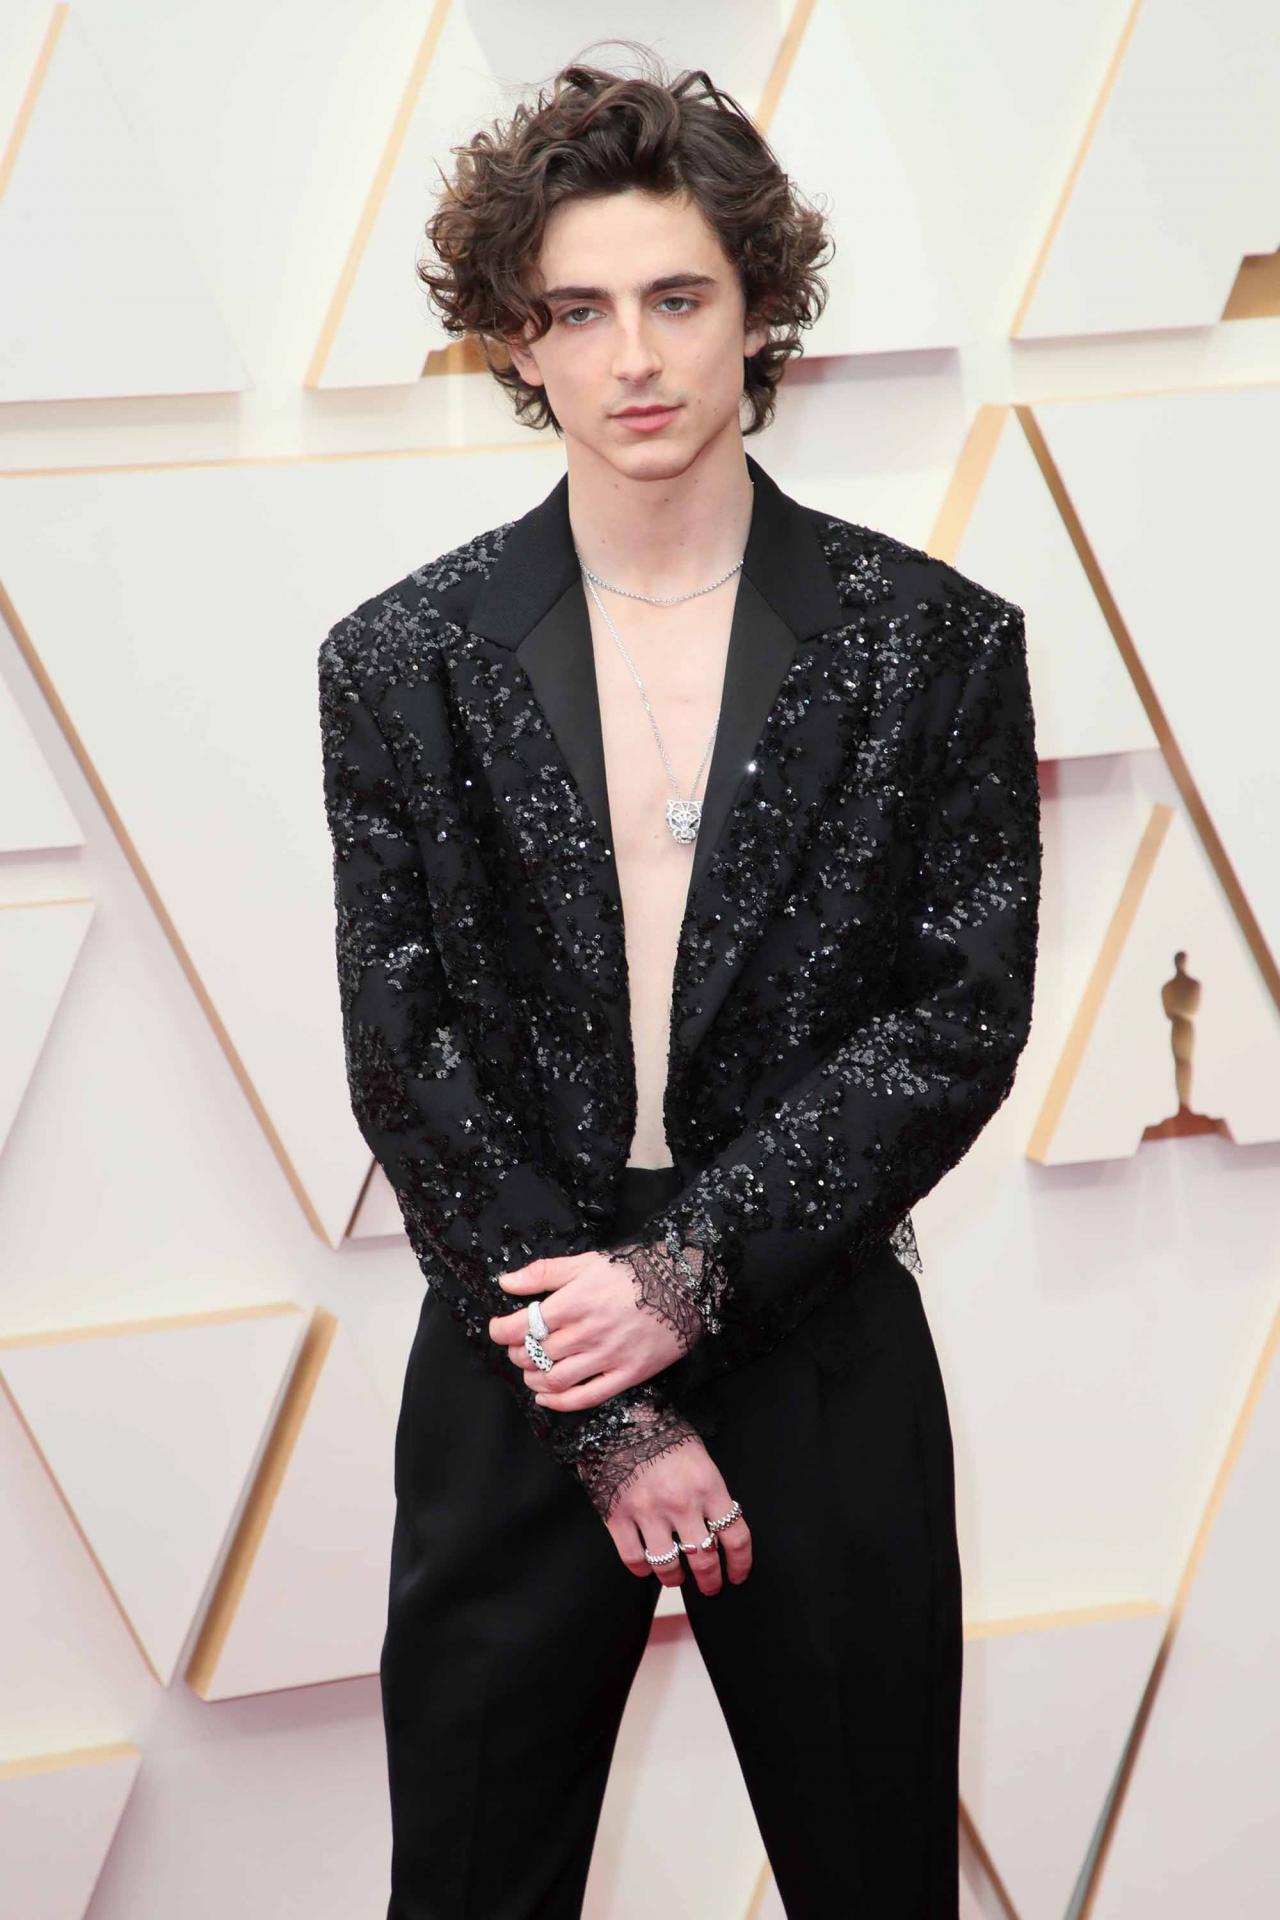 HOLLYWOOD, CALIFORNIA - MARCH 27: Timothée Chalamet attends the 94th Annual Academy Awards at Hollywood and Highland on March 27, 2022 in Hollywood, California. (Photo by David Livingston/Getty Images)